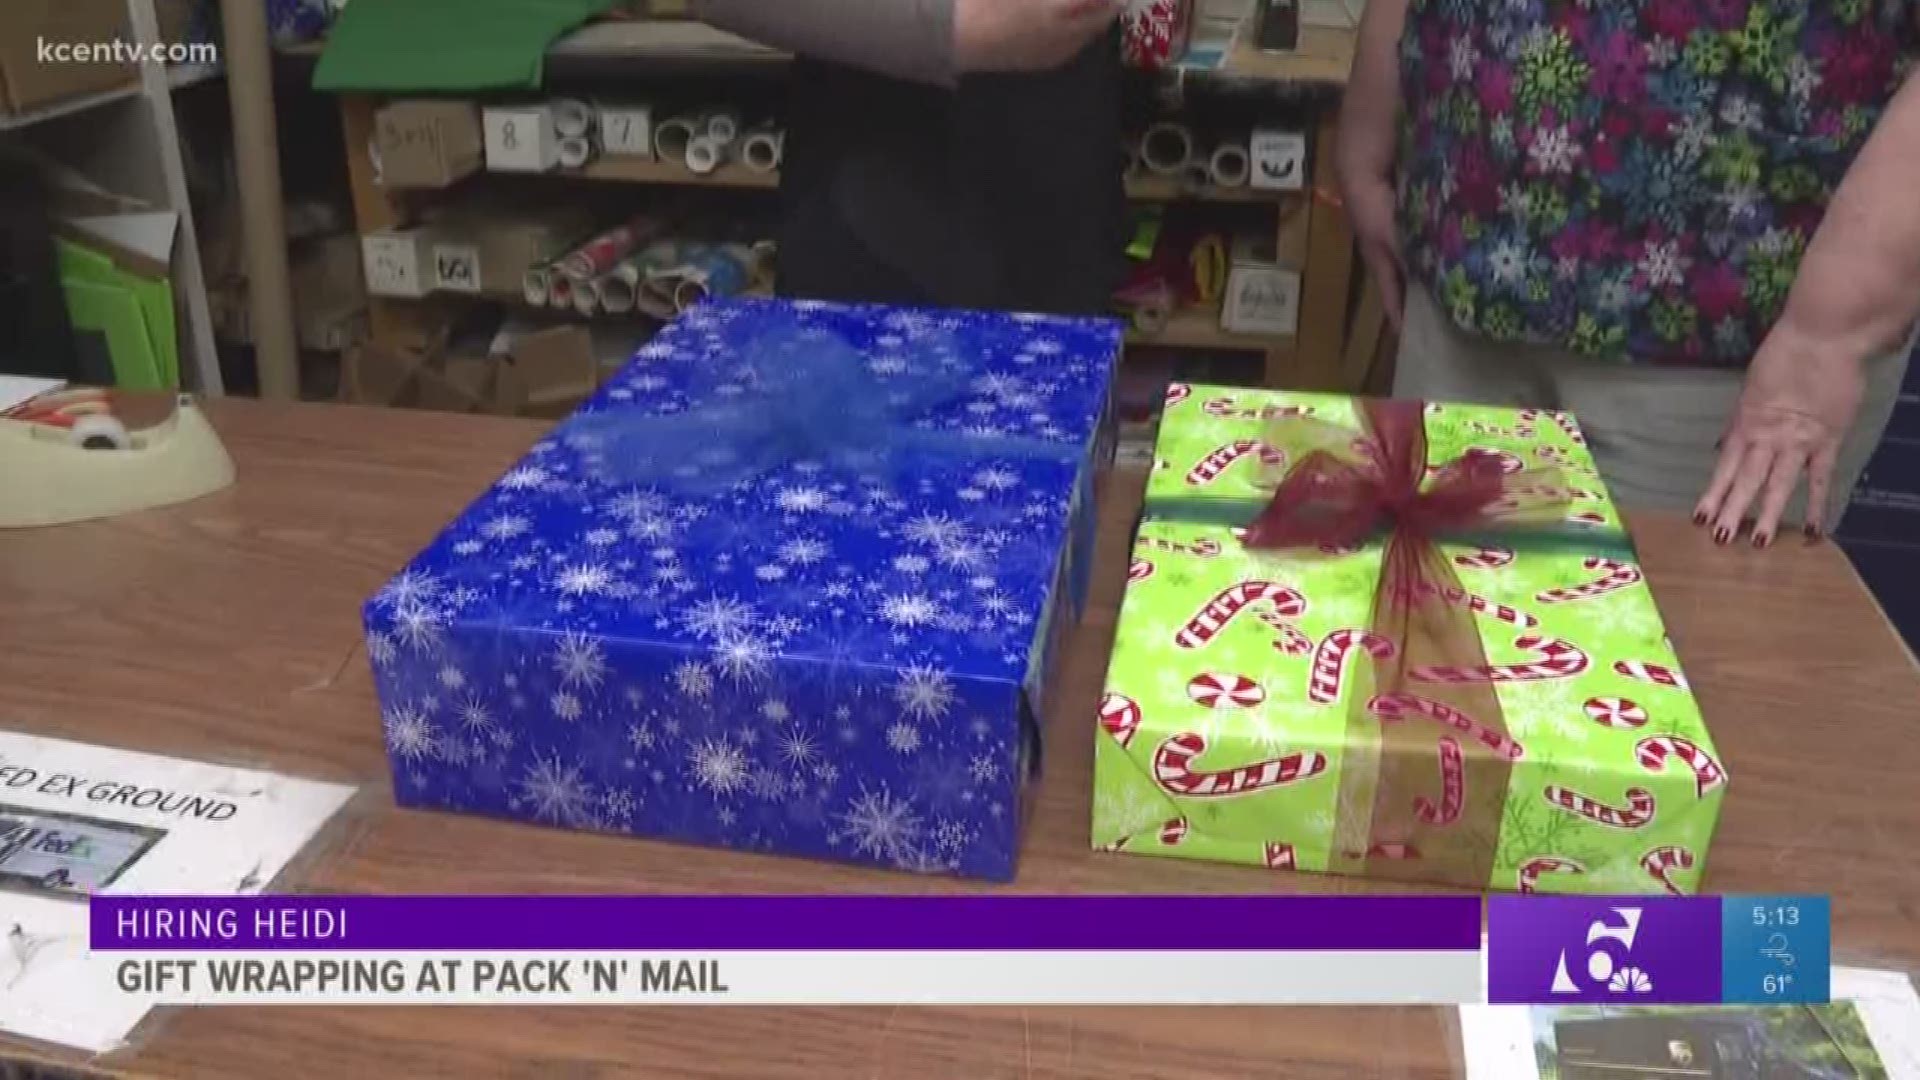 Hiring Heidi: Gift wrapping at Pack 'n' Mail